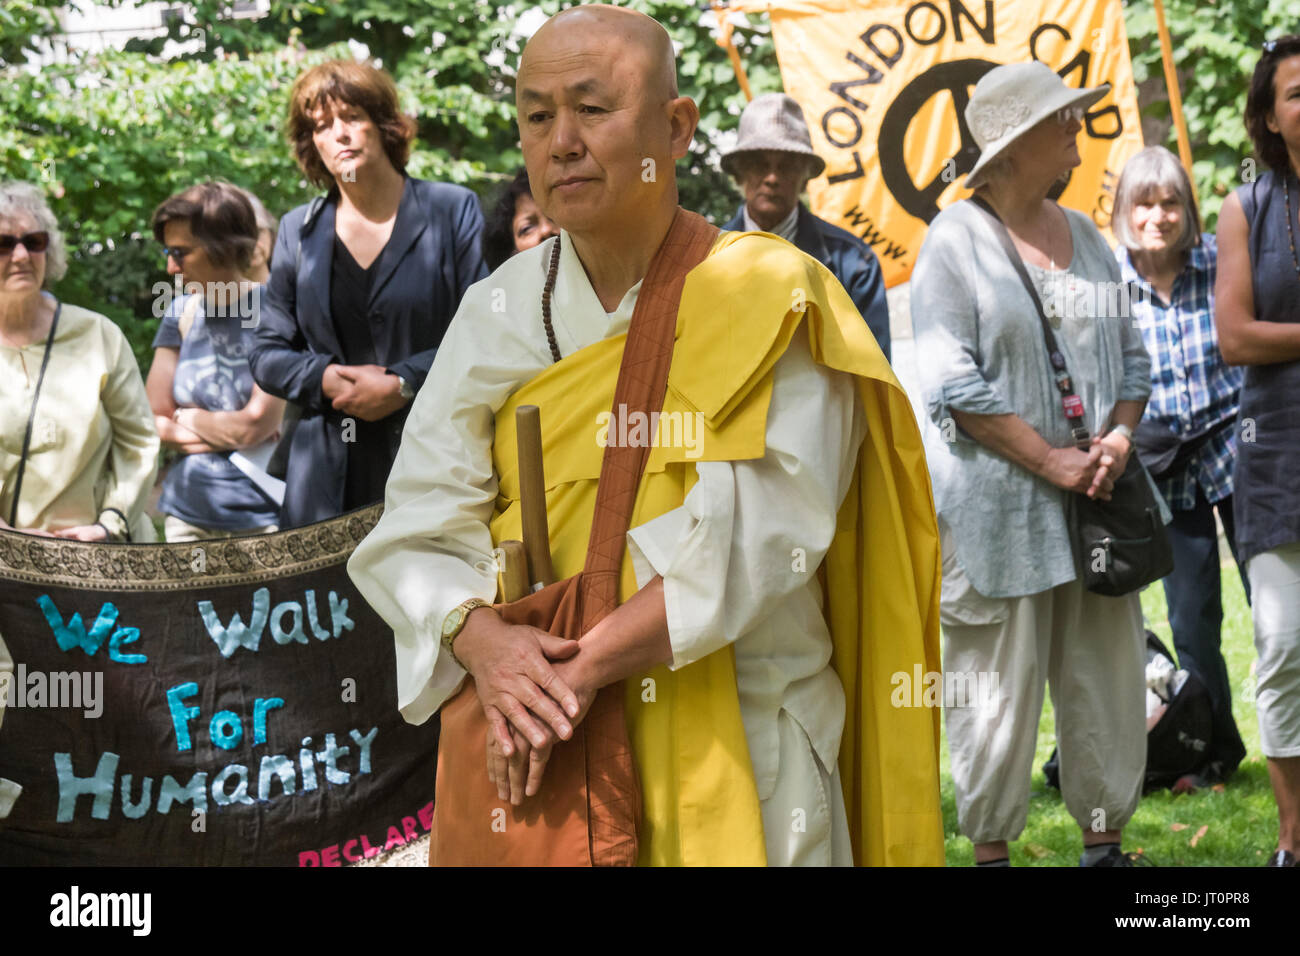 London, UK. 6th Aug, 2017. London, UK. 6th August 2017. Buddhist monk from the Battersea monastery and Peace Pagoda Reverend Gyoro Nagase waits to speak at the London CND ceremony in memory of the victims, past and present on the 72nd anniversary of the dropping of the atomic bomb on Hiroshima and the second atomic bomb dropped on Nagasaki three days later. After a number of speeches and performances there was a minute's silence during which the Deputy Mayor of Camden and others laid flowers around the commemorative cherry tree. Peter Marshall ImagesLive (Credit Image: © Peter Marshall/Imag Stock Photo